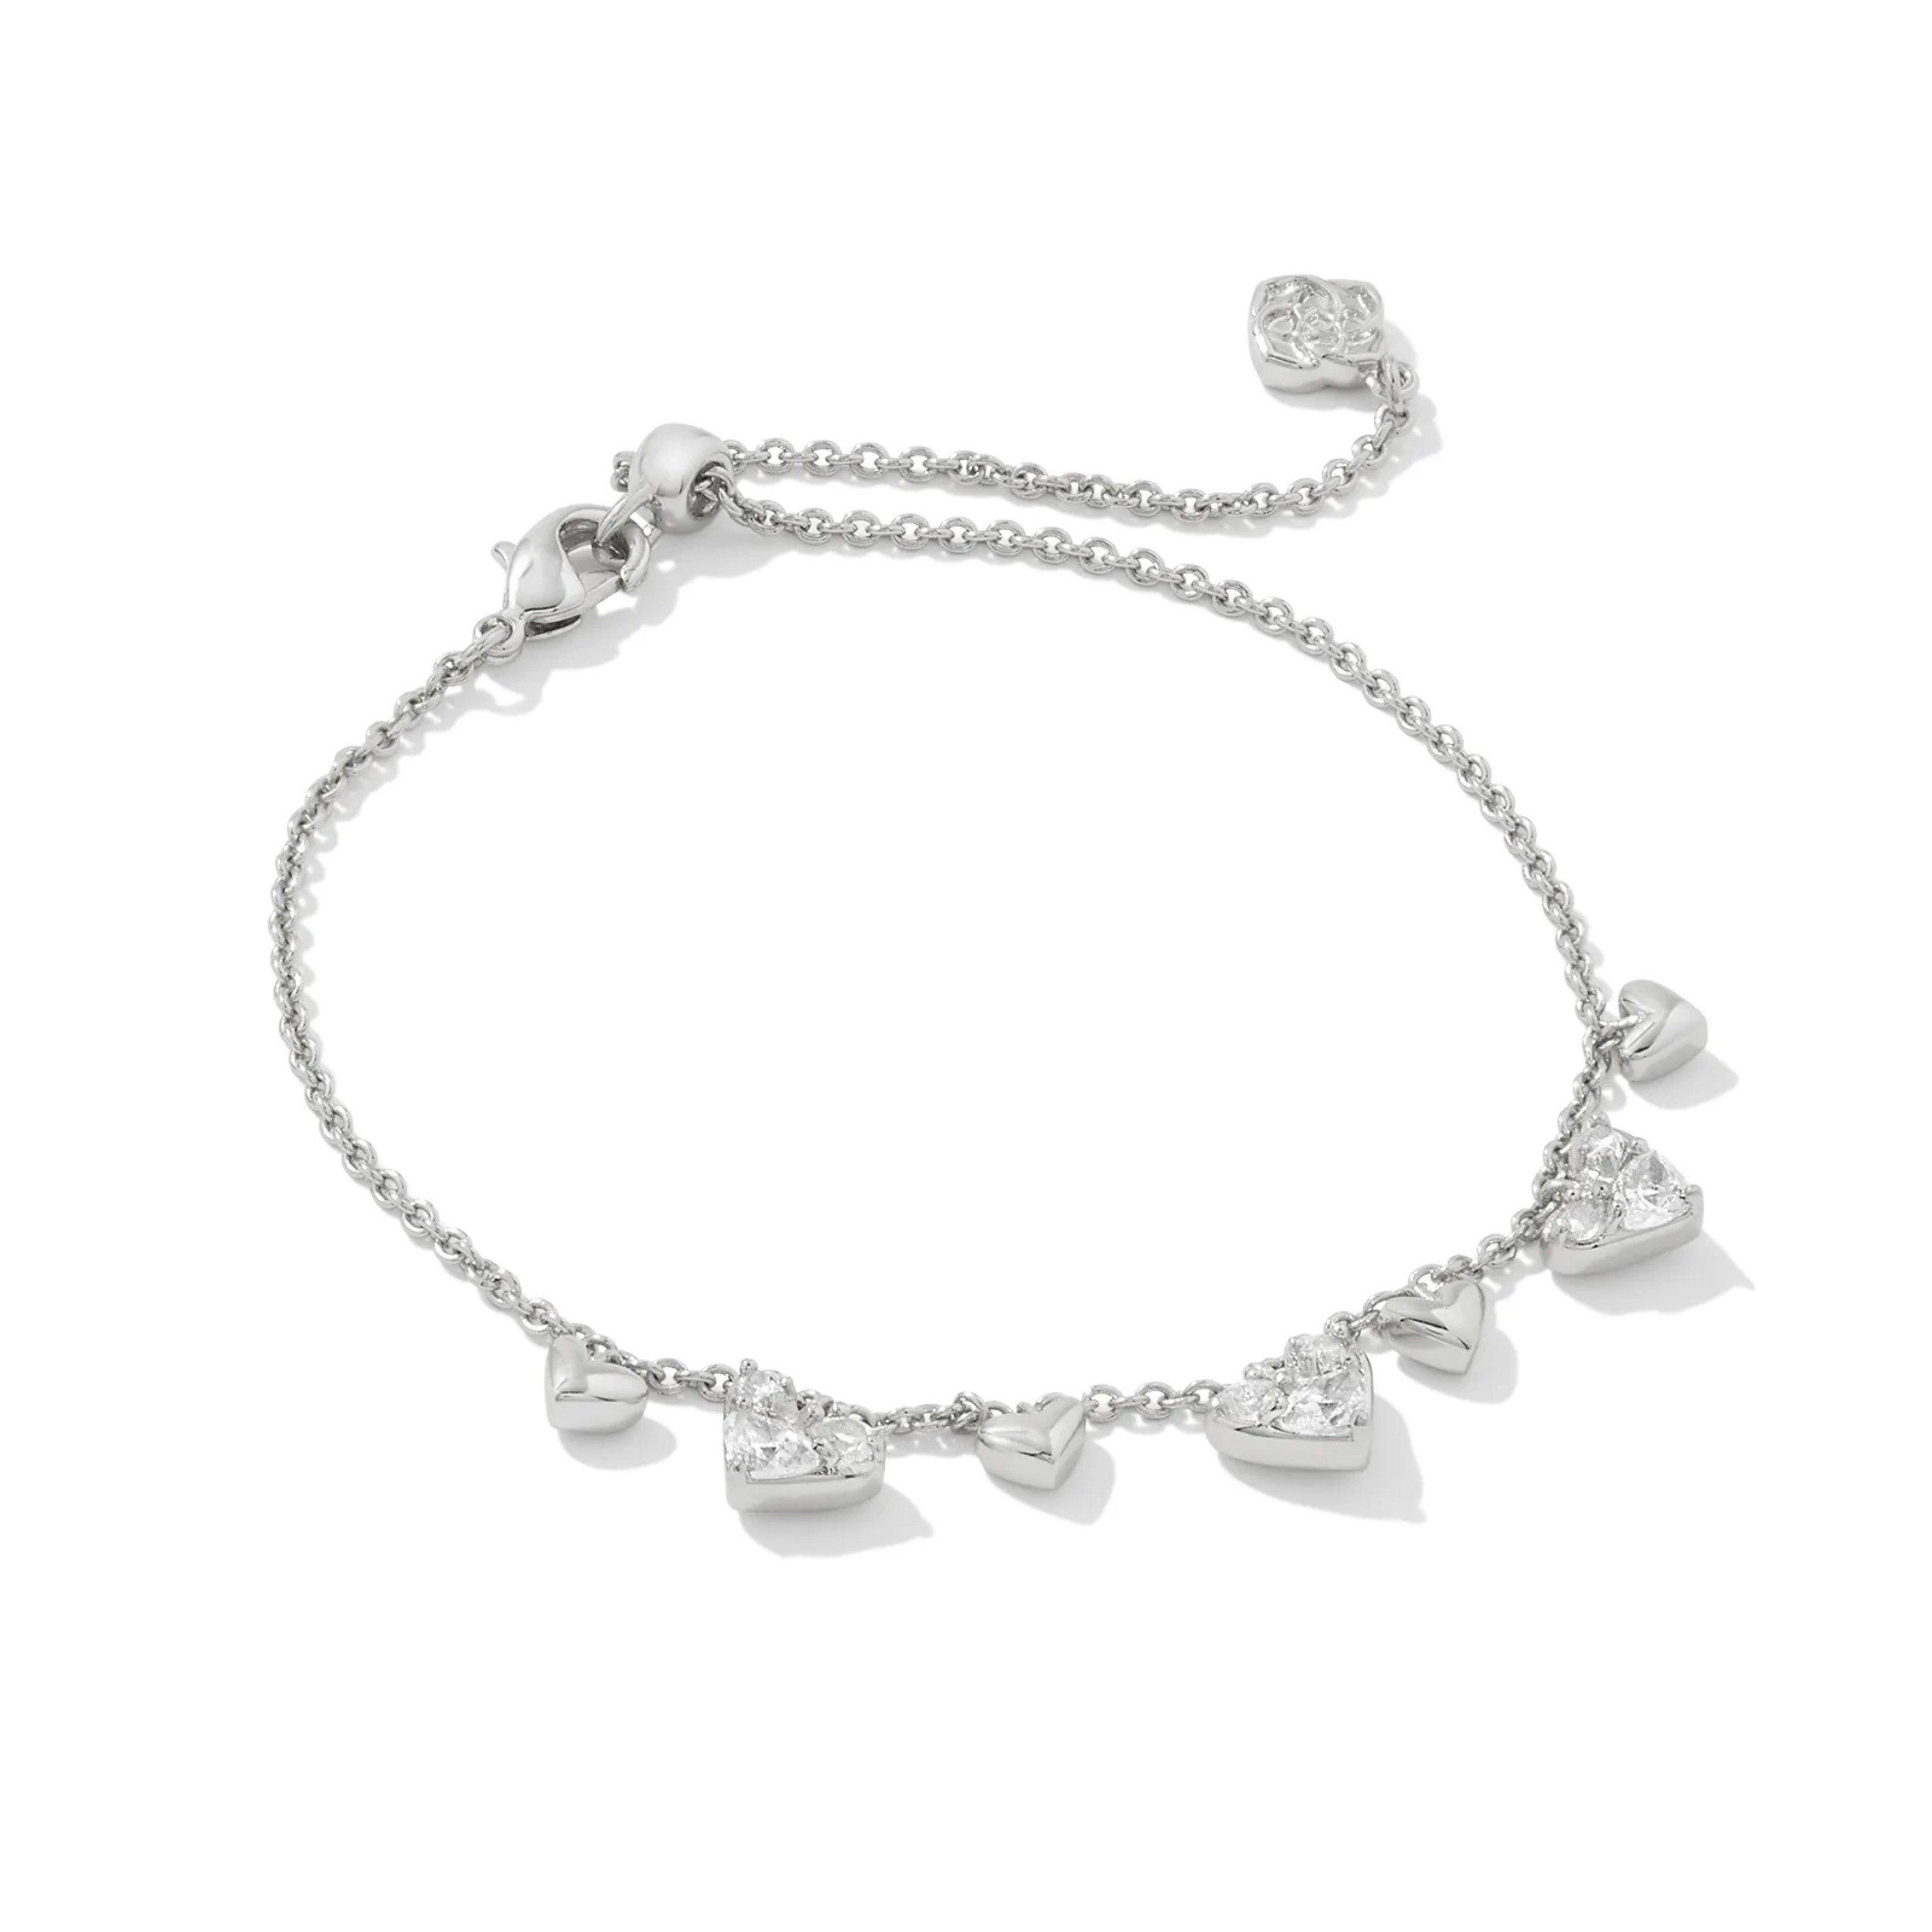 Kendra Scott | Haven Heart Silver Crystal Chain Bracelet in White Crystal - Giddy Up Glamour Boutique